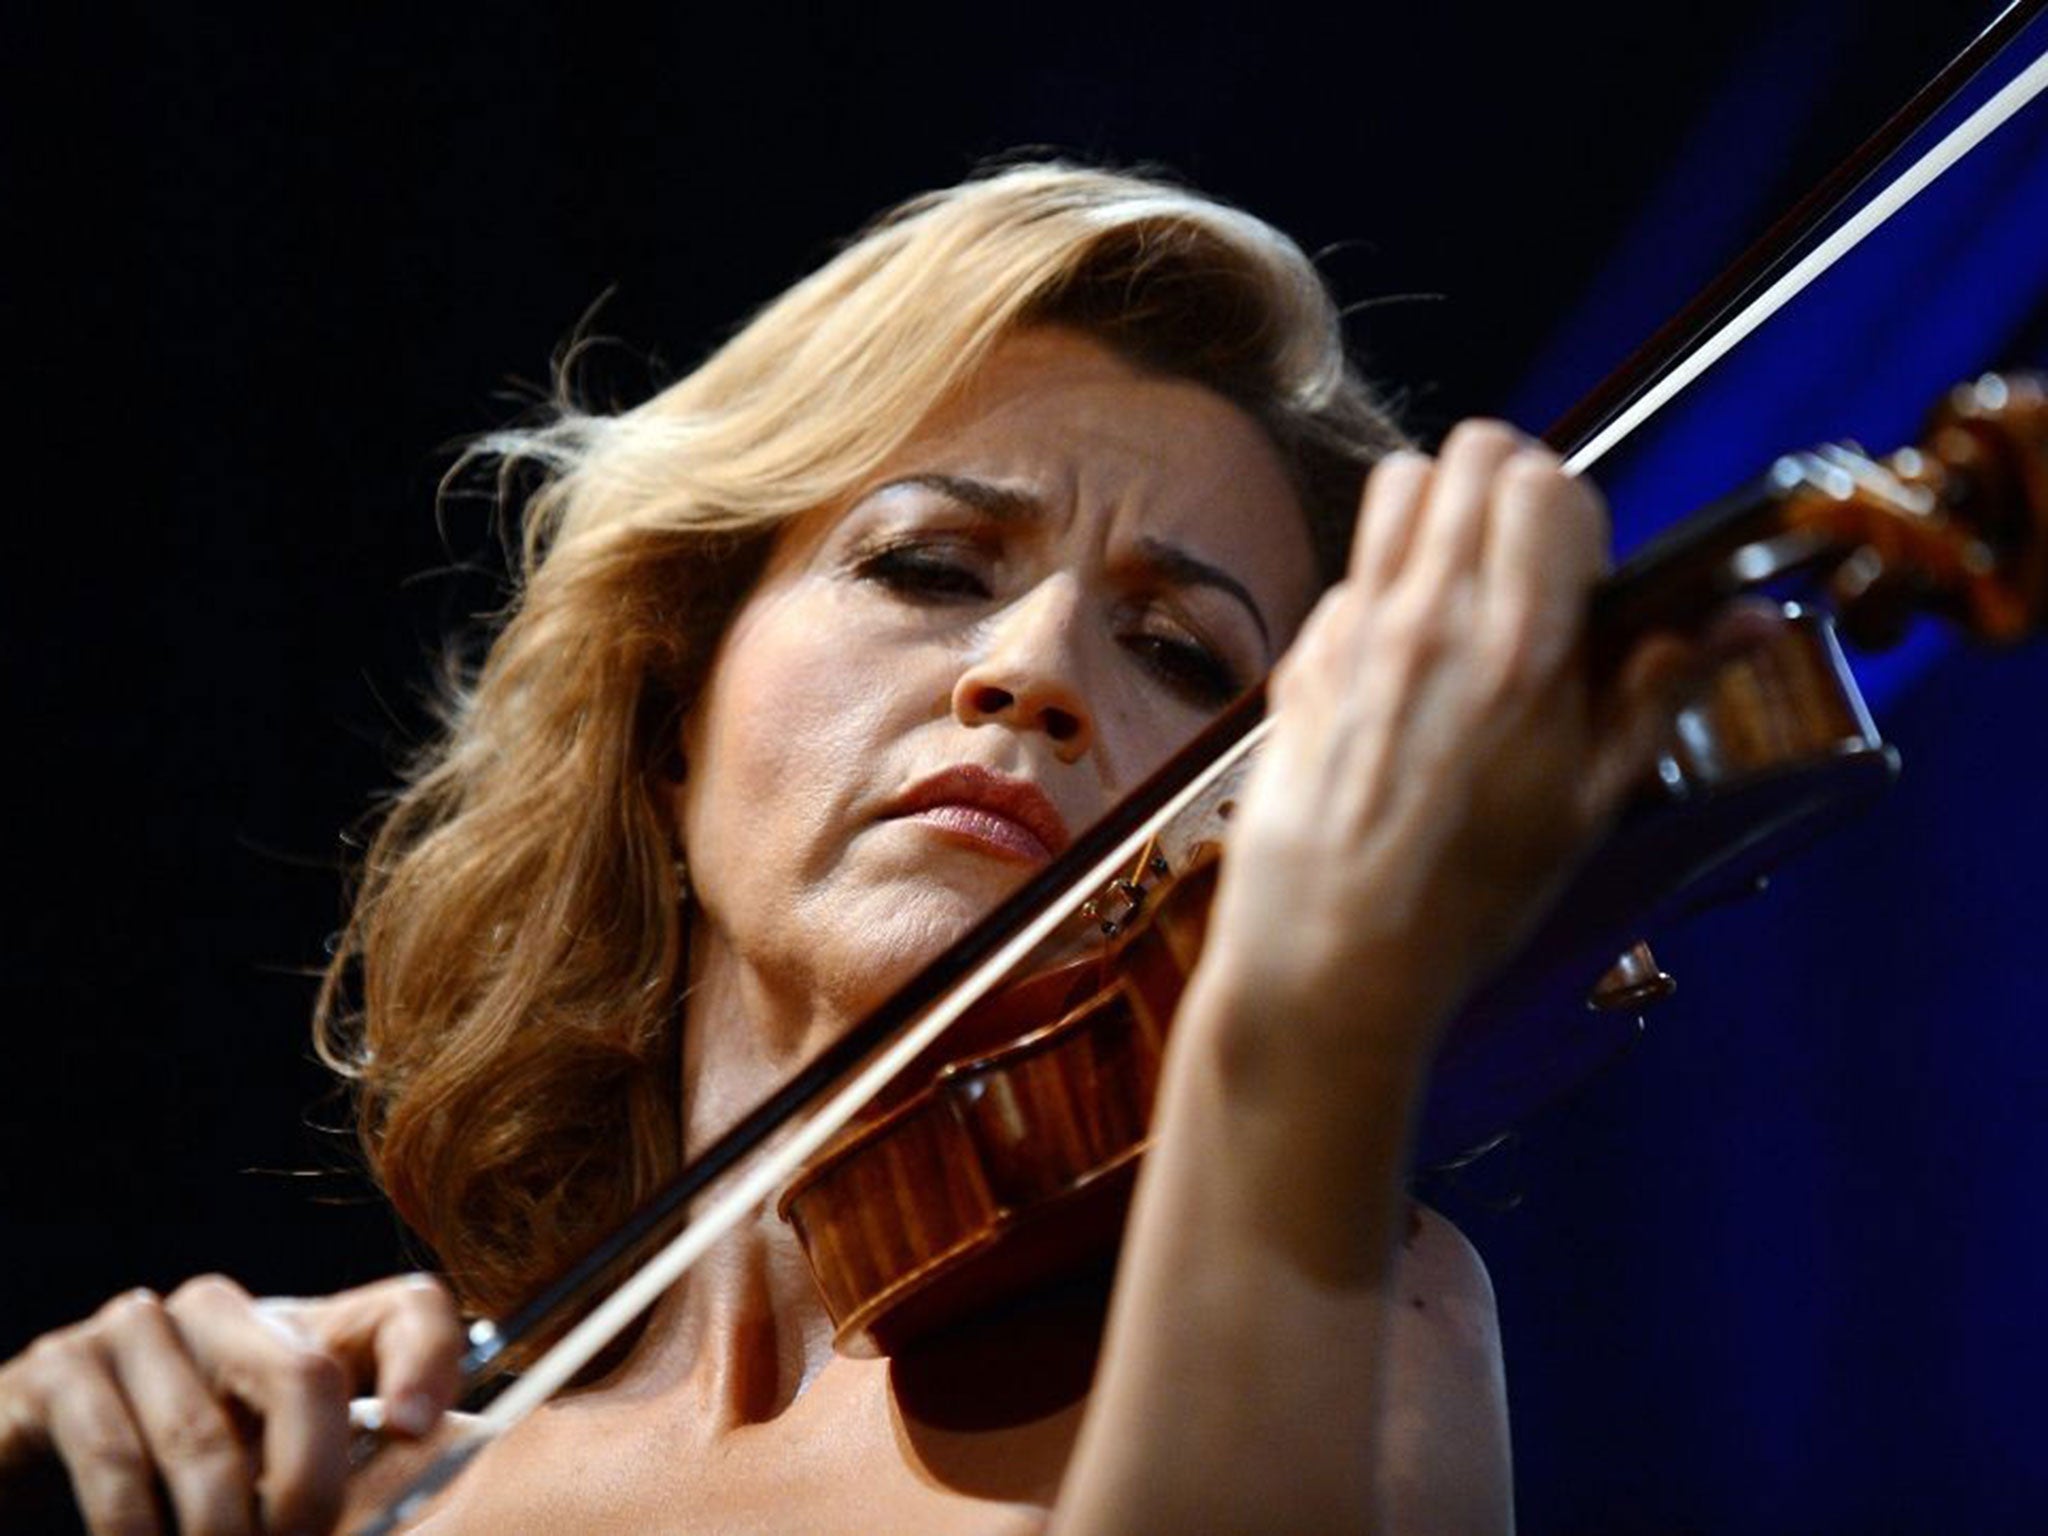 Anne-Sophie Mutter, who debuted at 13